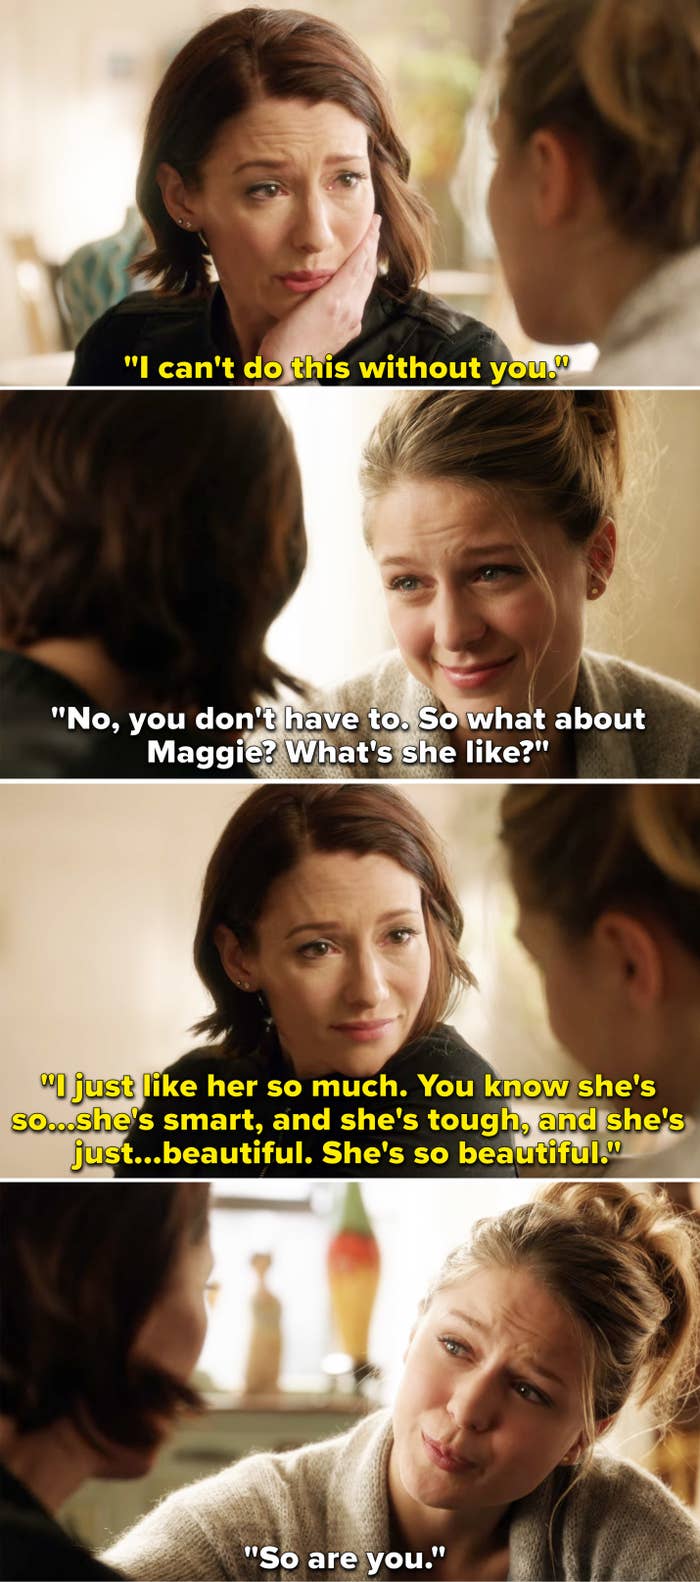 Alex talking about Maggie and saying she&#x27;s smart, tough, and so beautiful